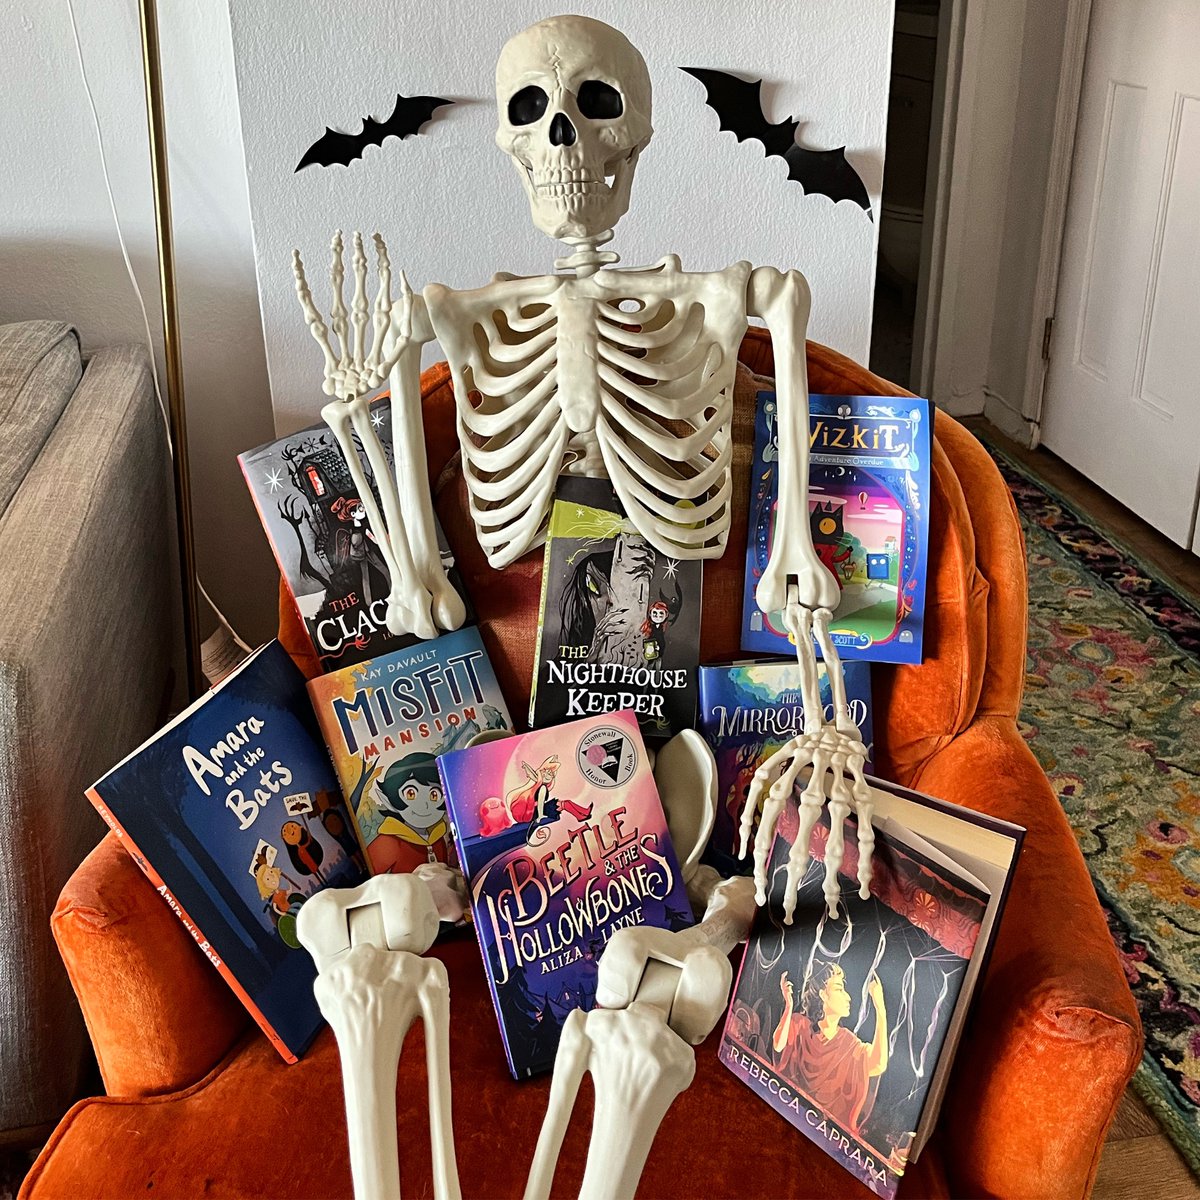 Greetings, gals and ghouls! Are you in need of a dash of magic, a cauldron of thrills, and a whole lot of fun? Your pal Skel Silverstein is here with some eerily brilliant recommendations for Spooky Season! @SimonKIDS @simonteen